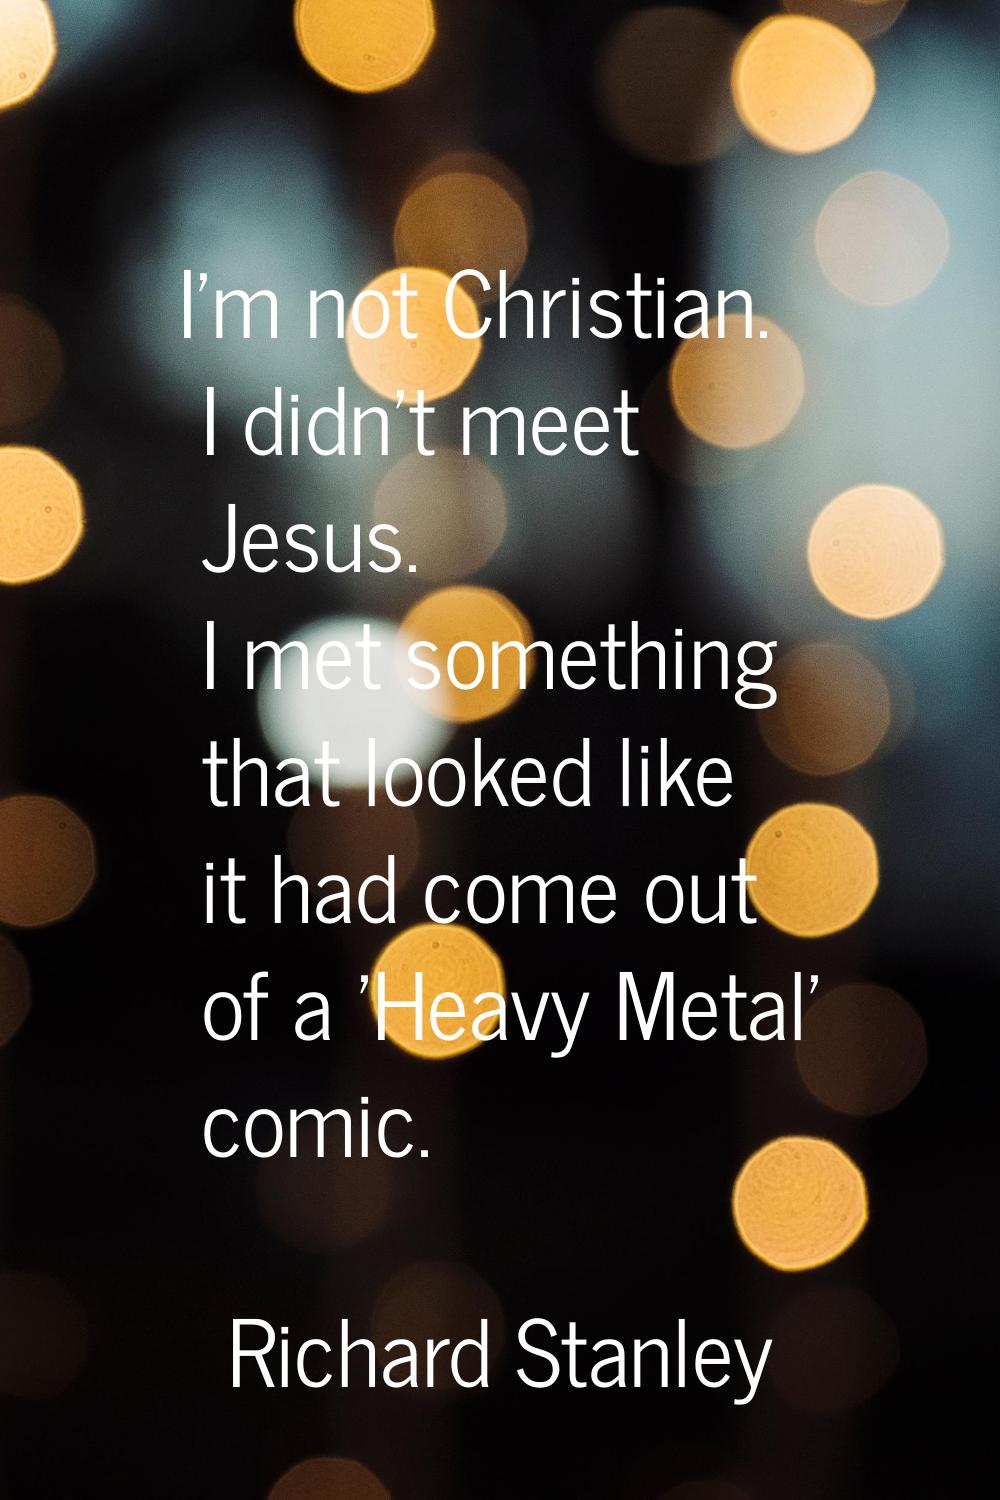 I'm not Christian. I didn't meet Jesus. I met something that looked like it had come out of a 'Heav